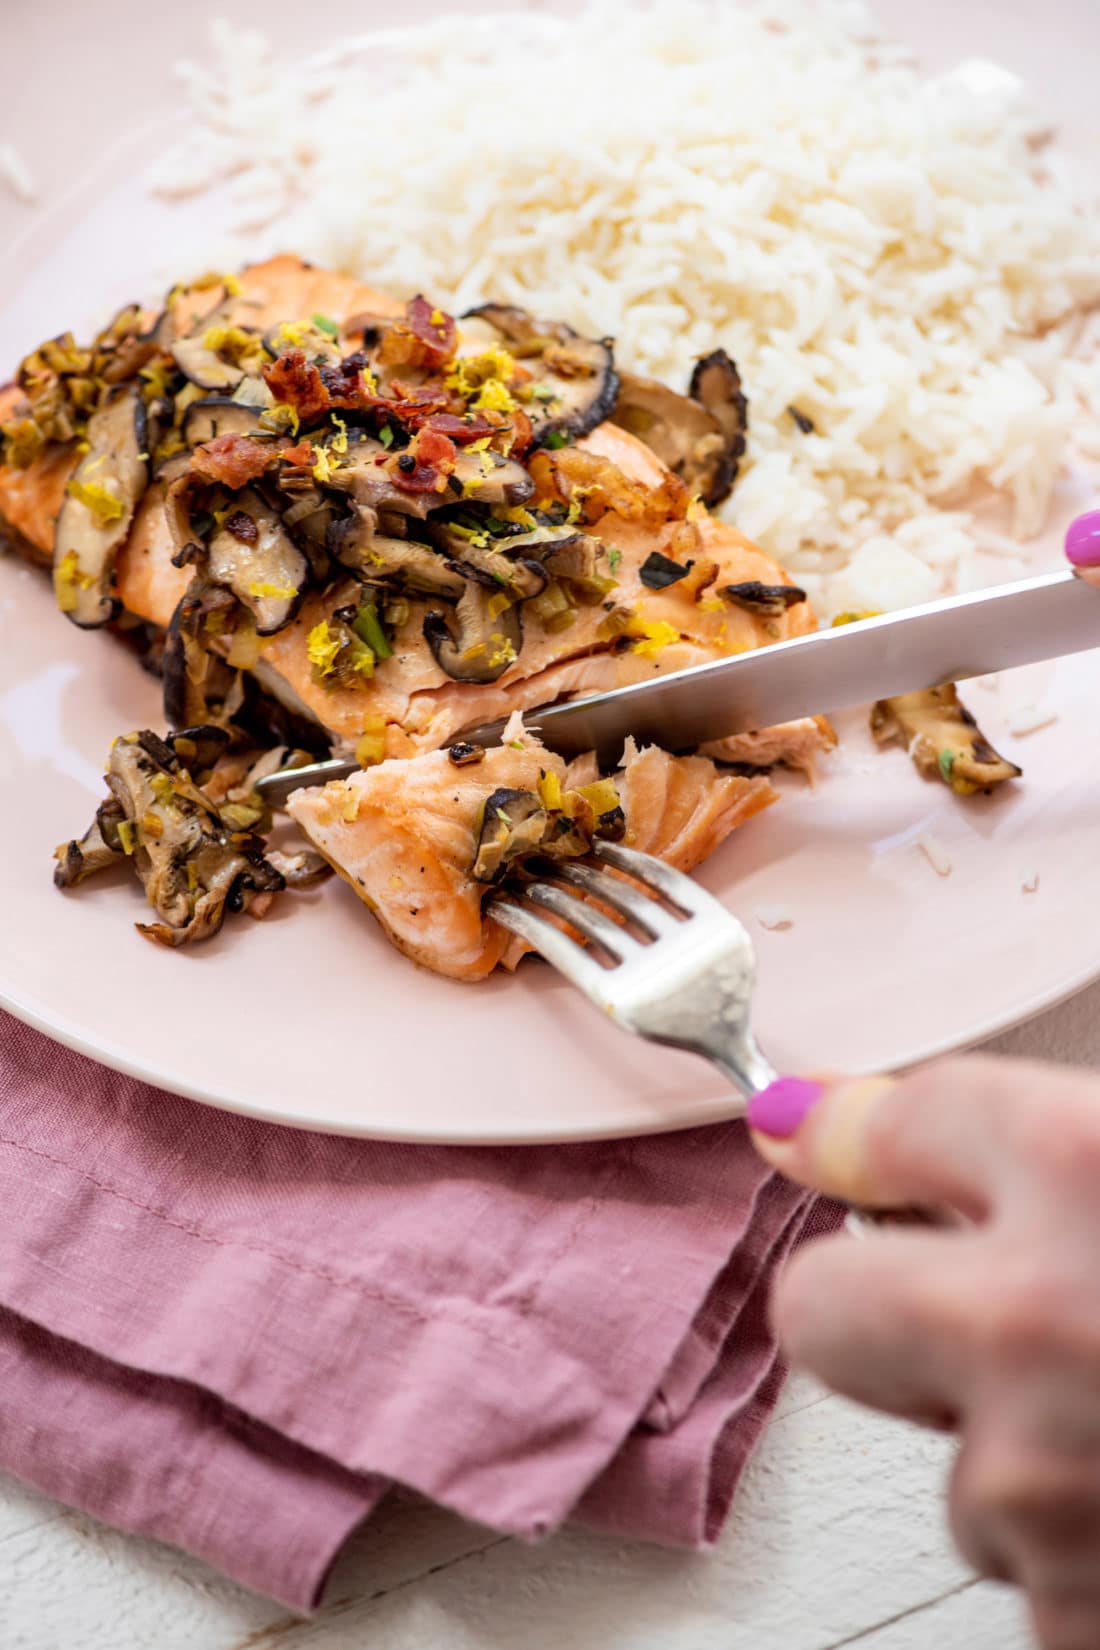 Woman using a fork and knife to cut off a piece of Orange Salmon with Leeks and Mushrooms.